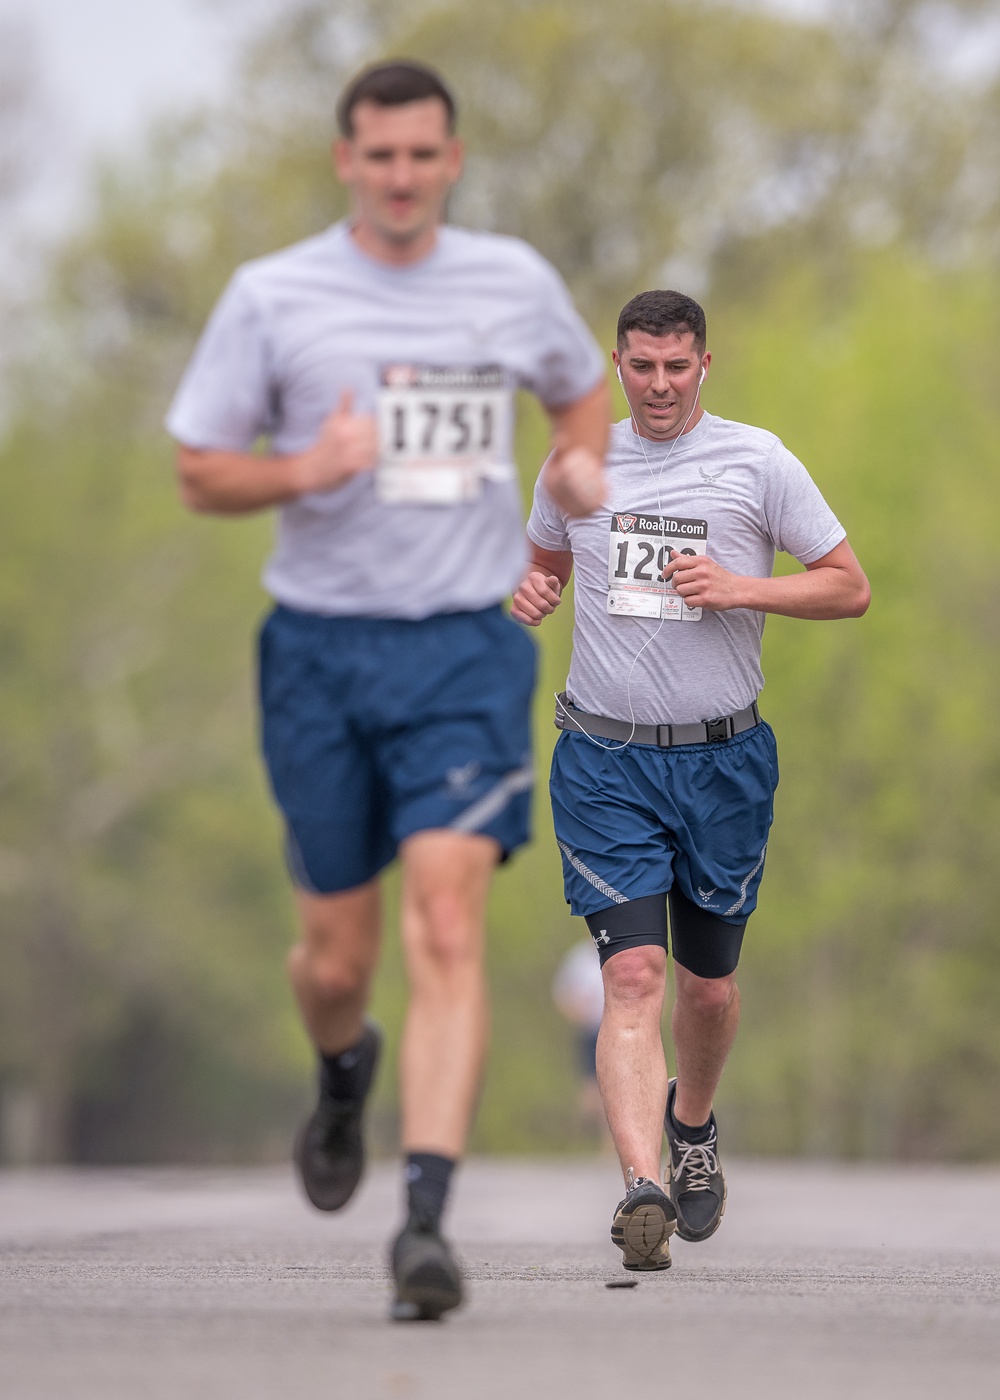 138th Fighter Wing Airmen perform annual physical fitness test